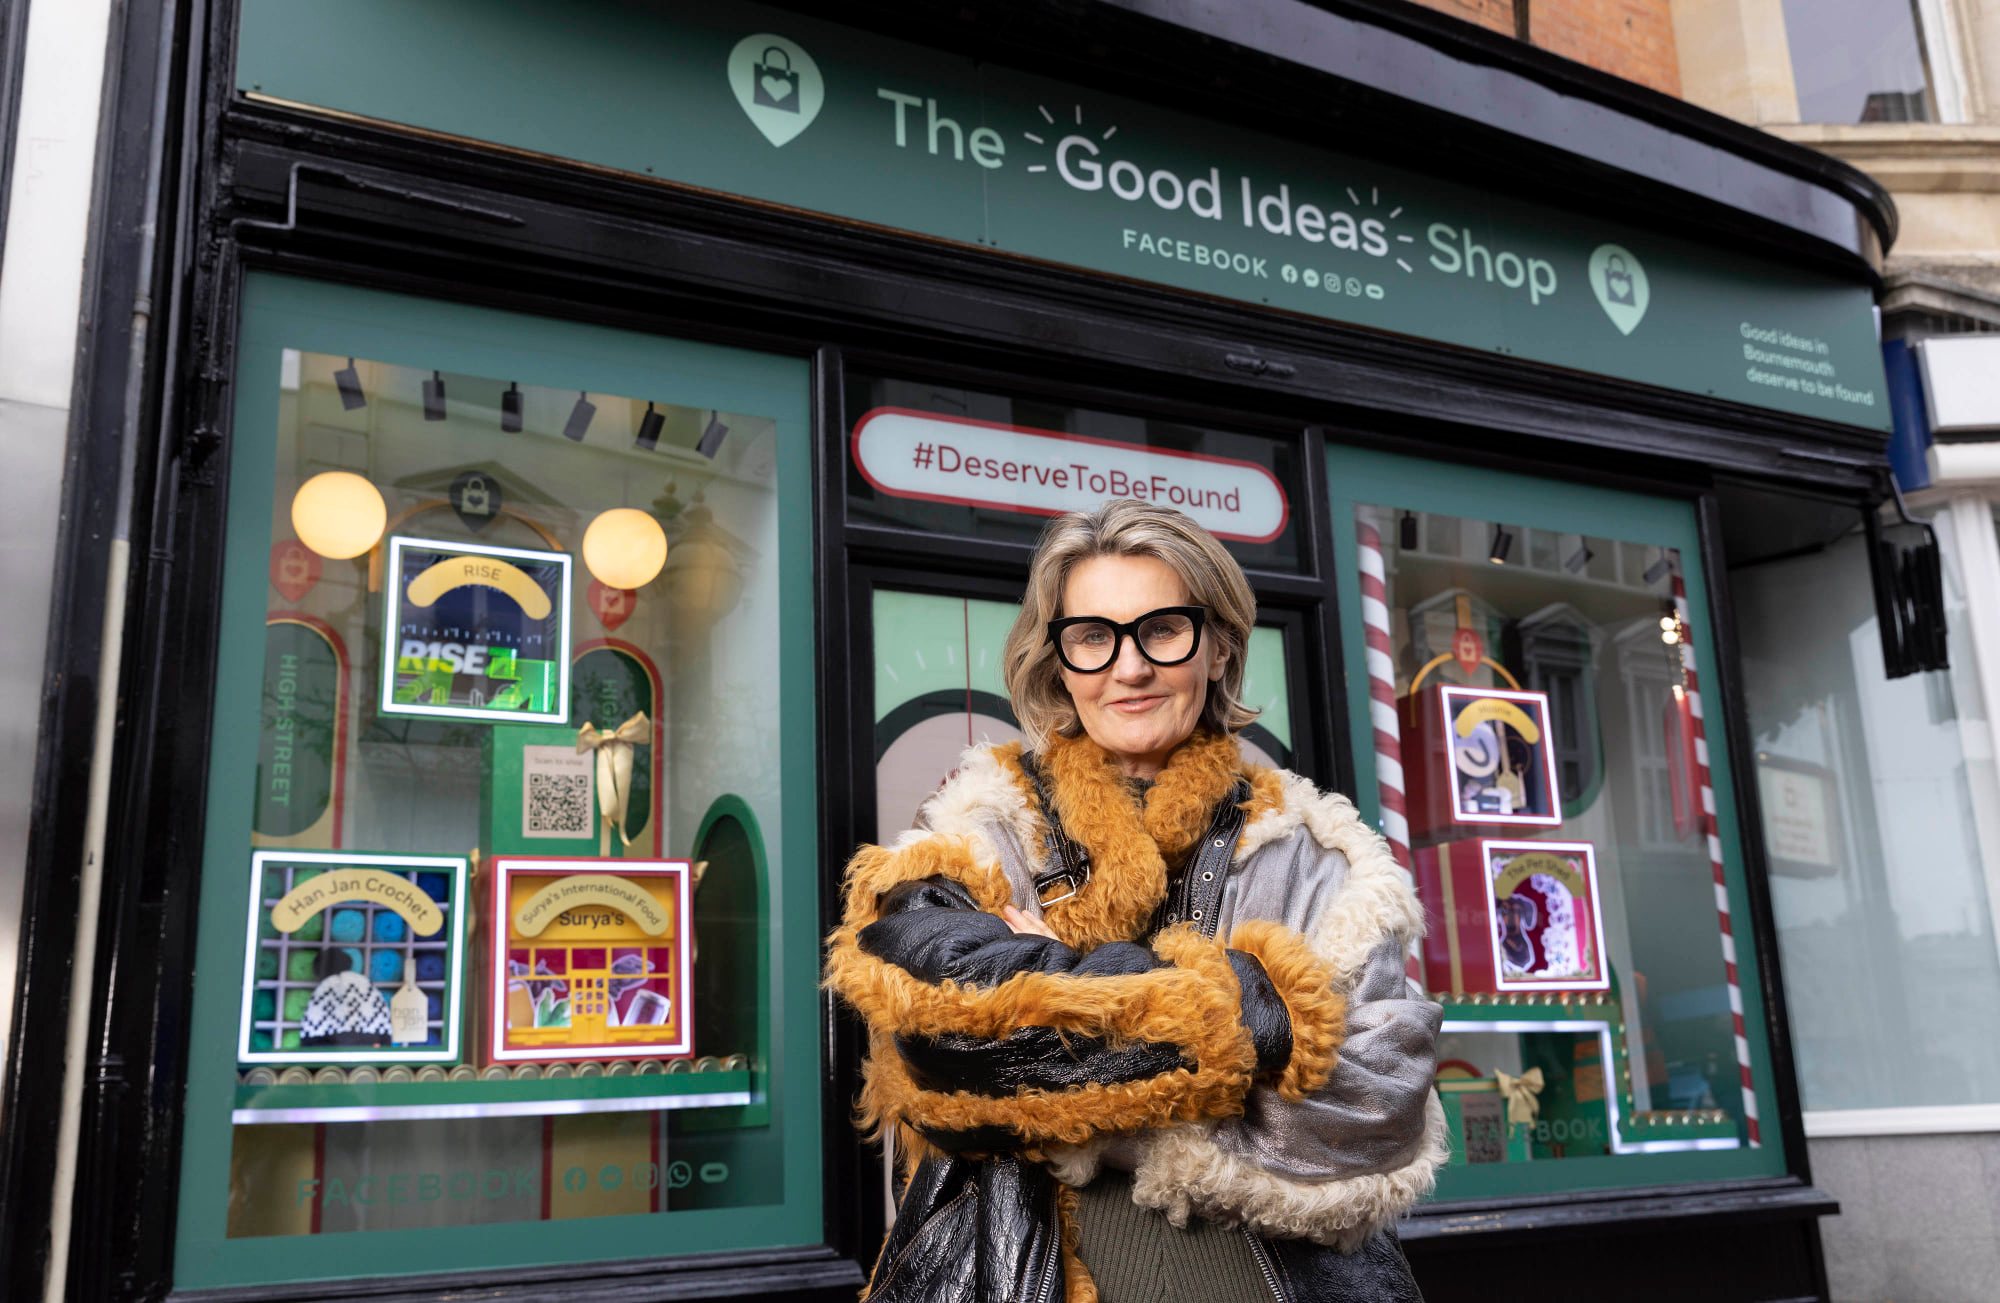 Picture of Mary Portas outside the Godd Ideas shop, a Meta branded retail outlet selling products from SMBs